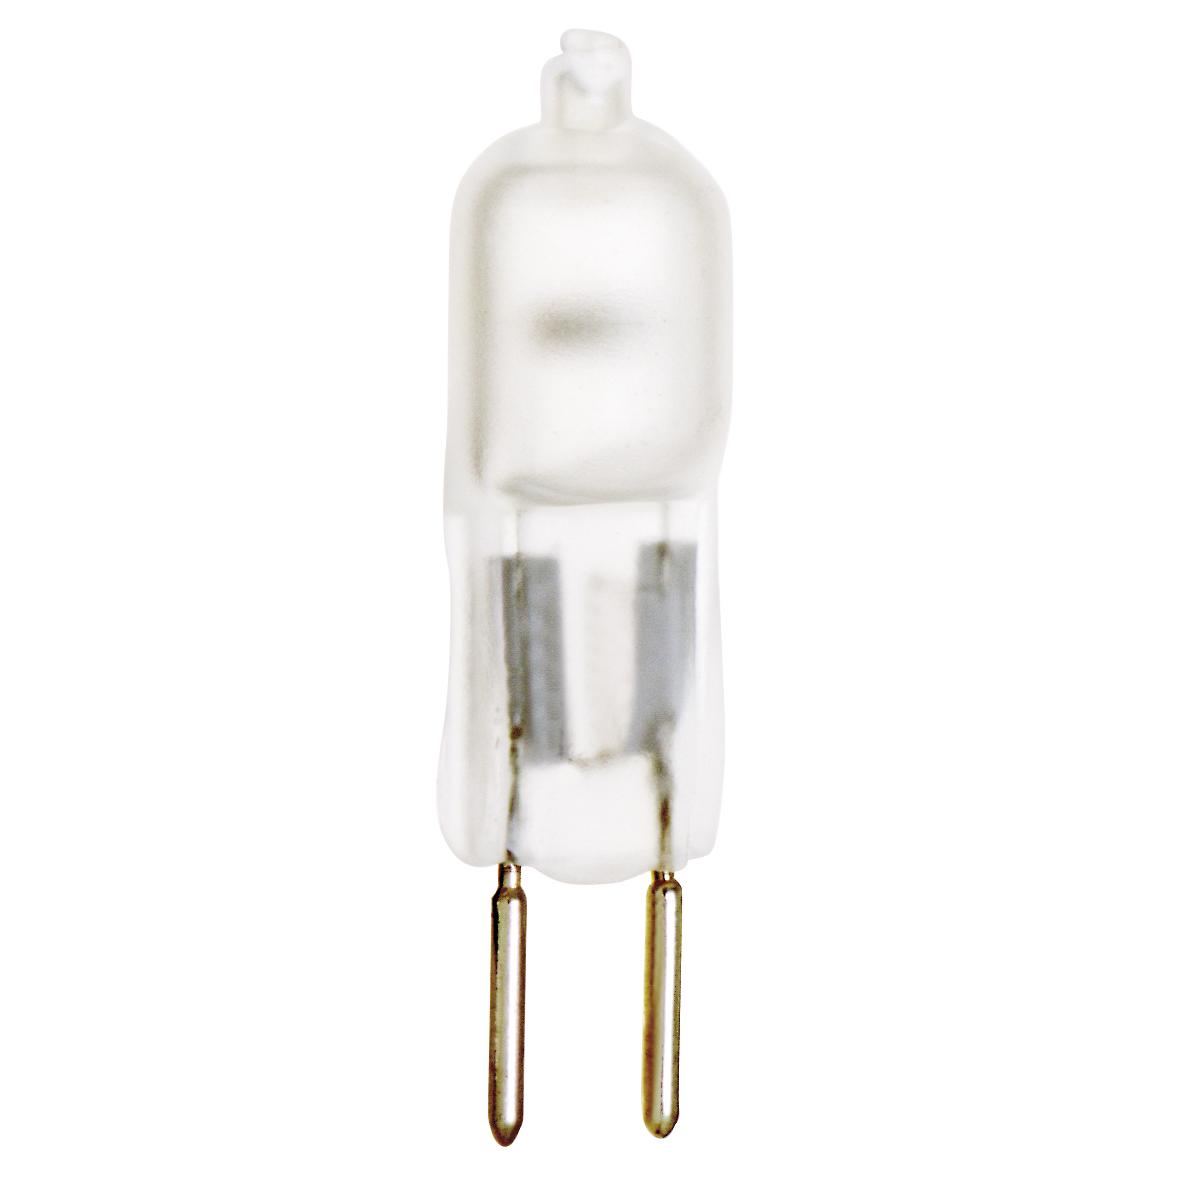 S1909 20W BI-PIN FROSTED 12V G4